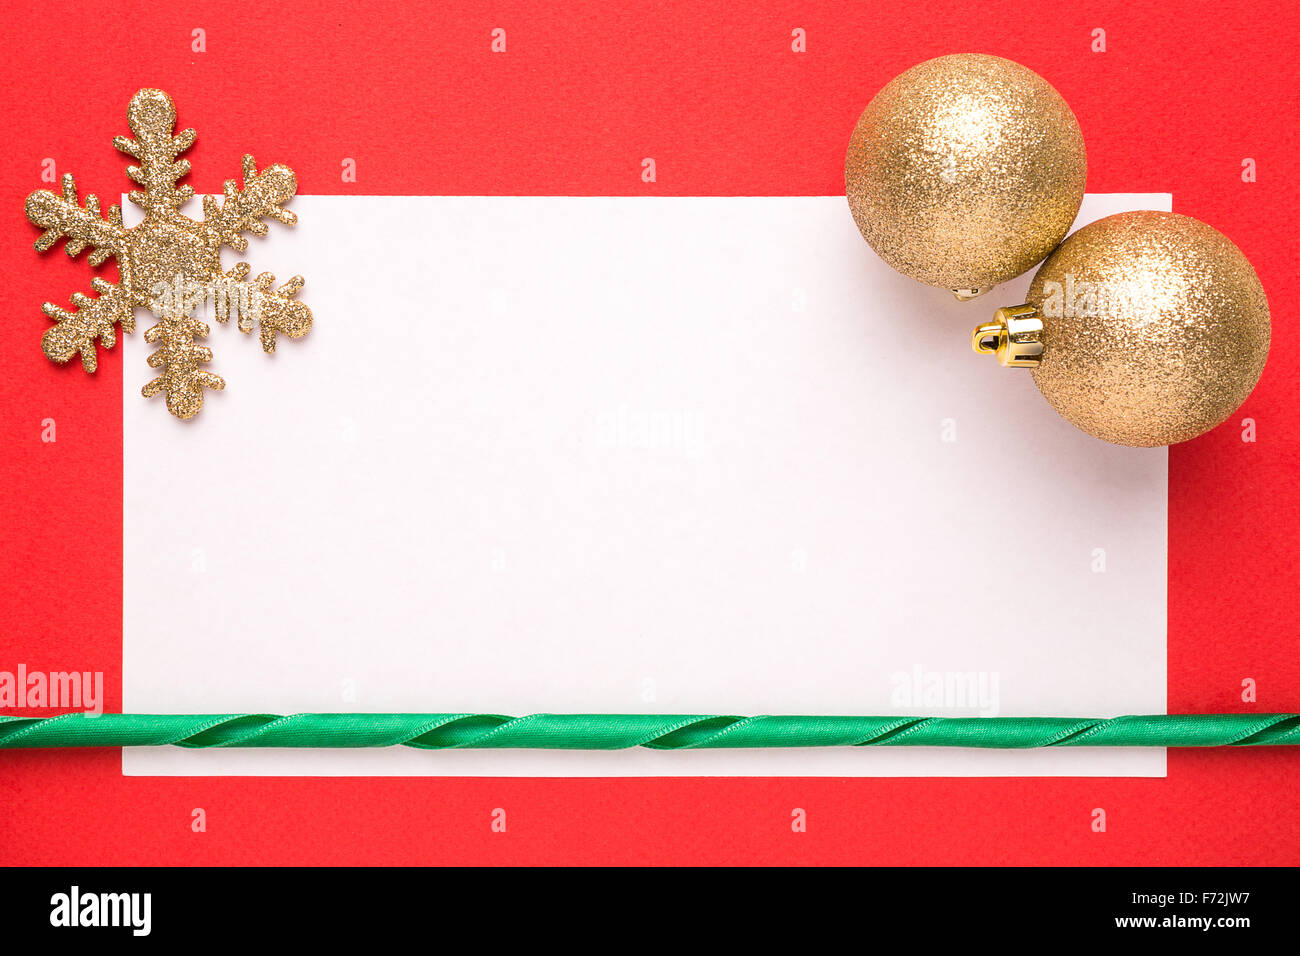 Blank Christmas card or invitation with golden snowflake and balls on red background Stock Photo